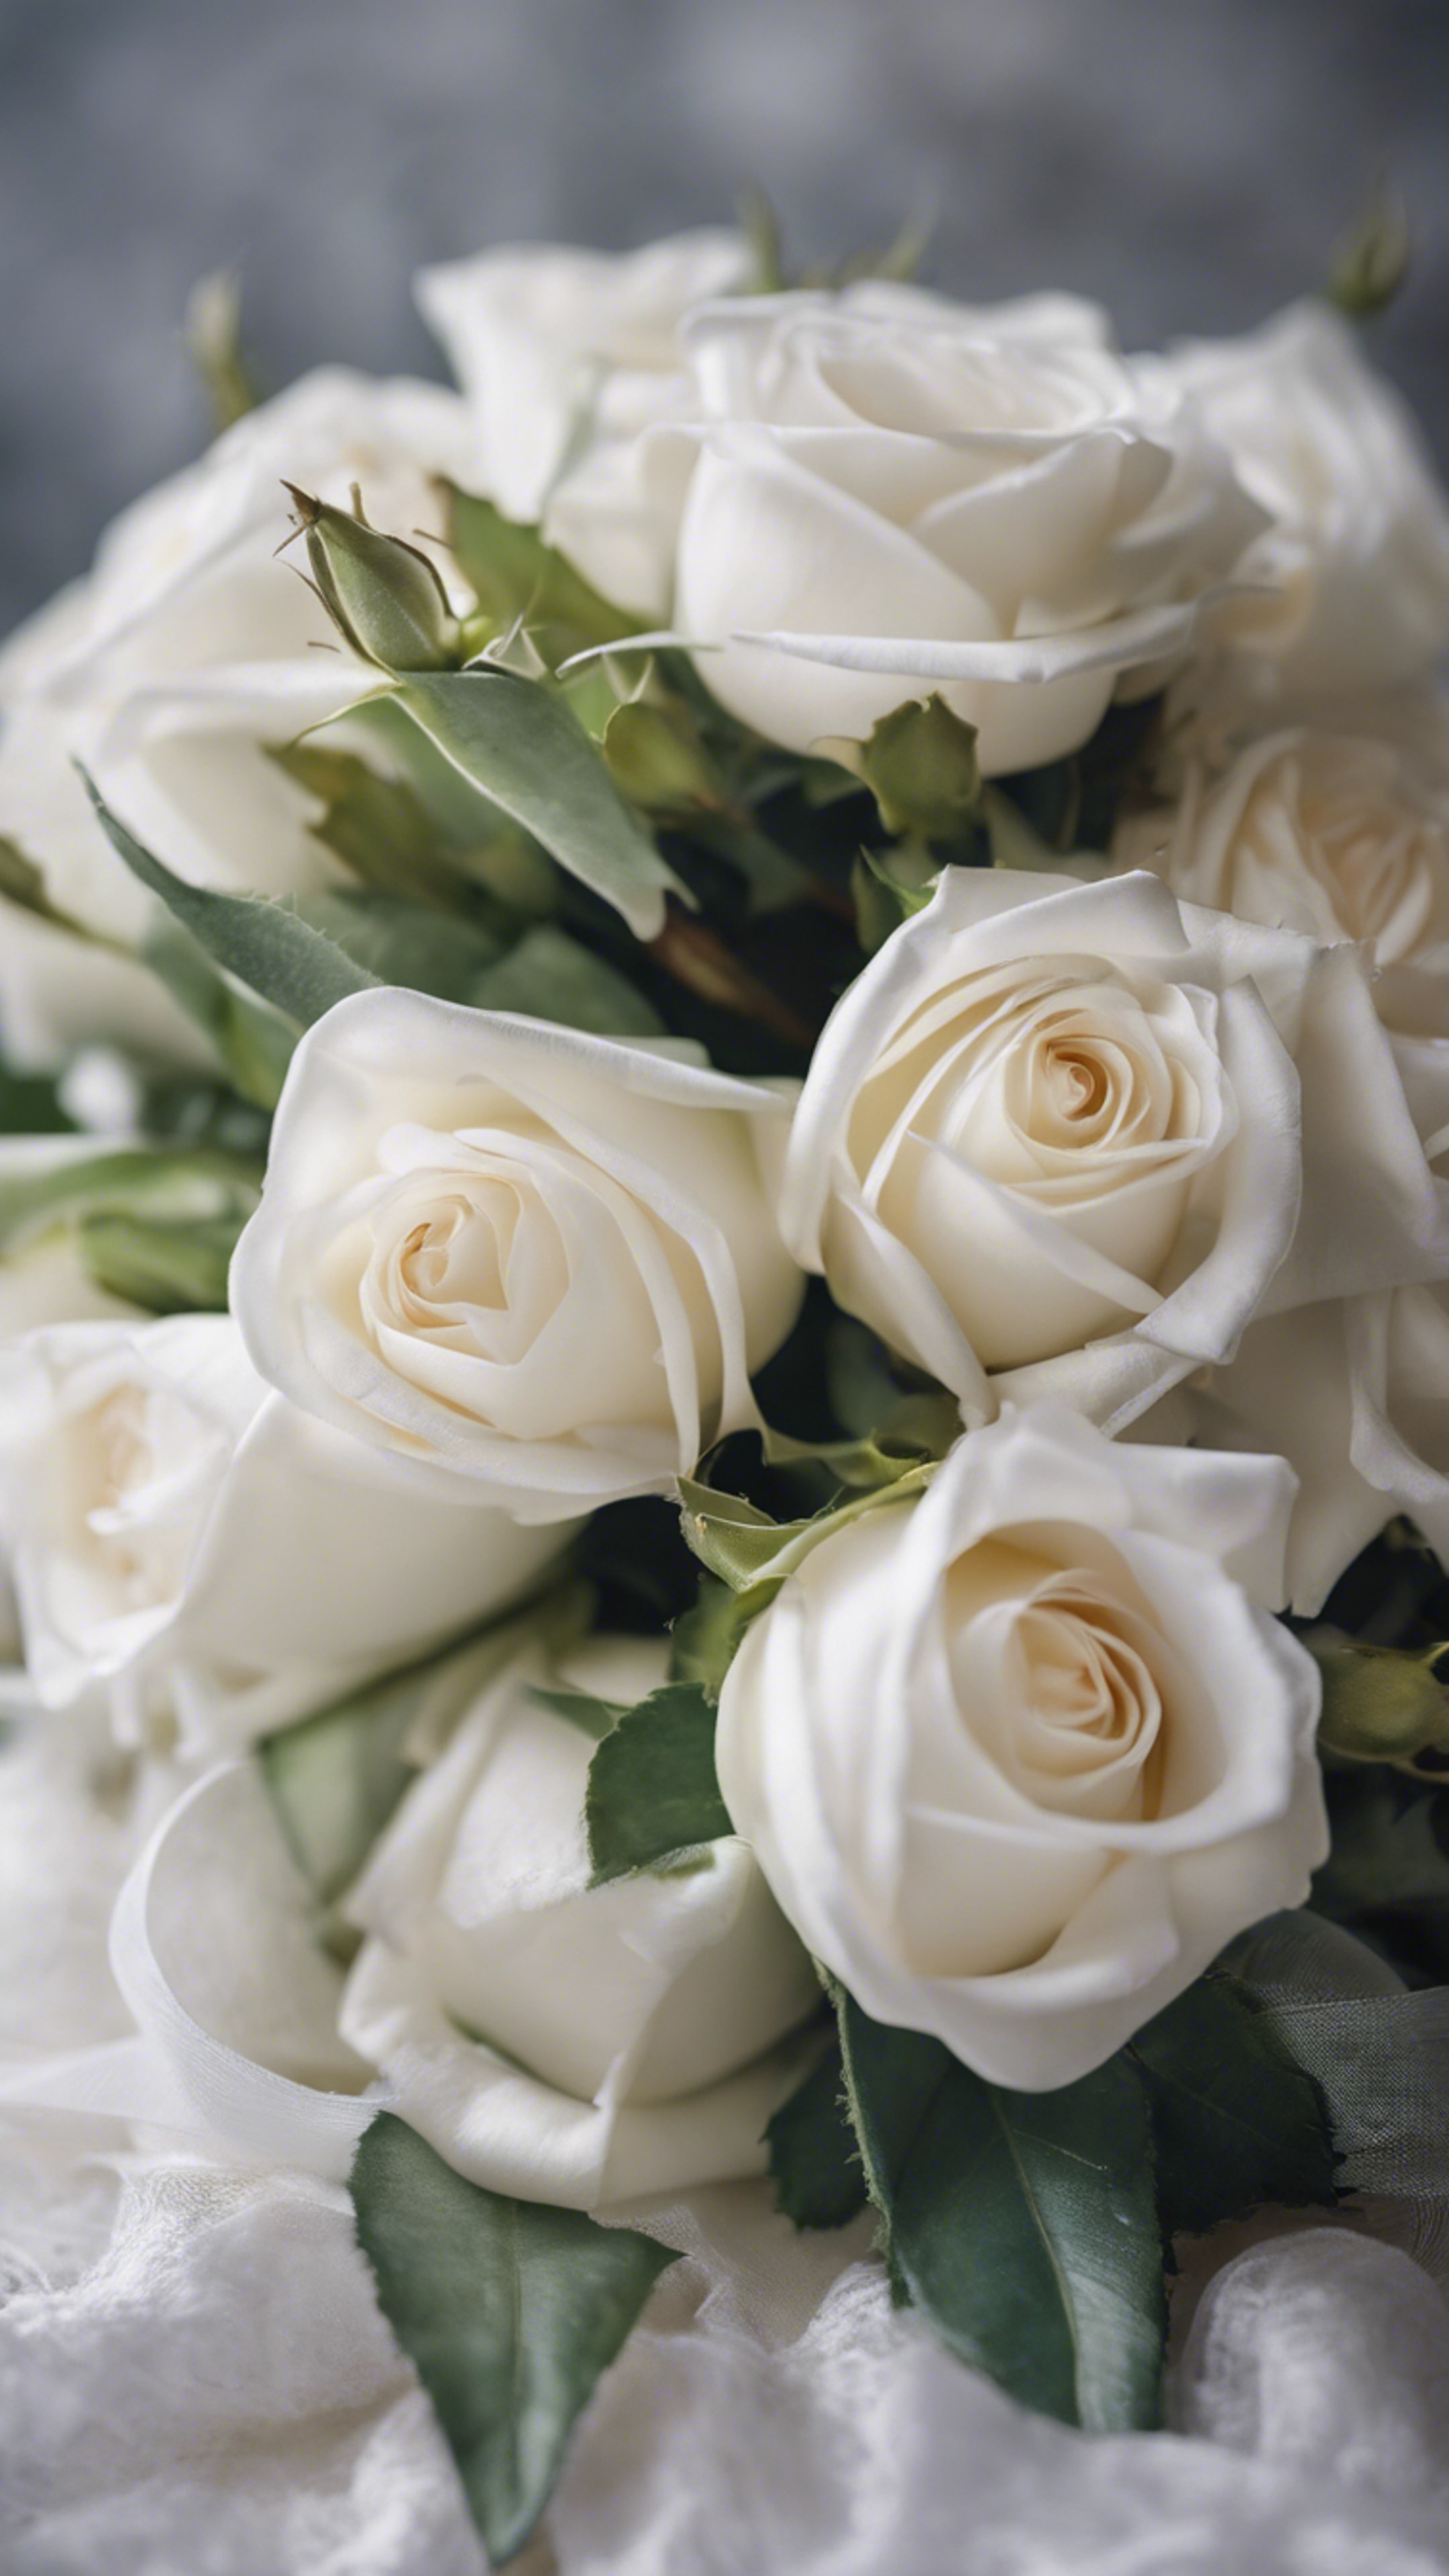 A bouquet of white roses wrapped in sheer white satin ribbon. Hintergrund[5223d8c249ea42cfaf4b]